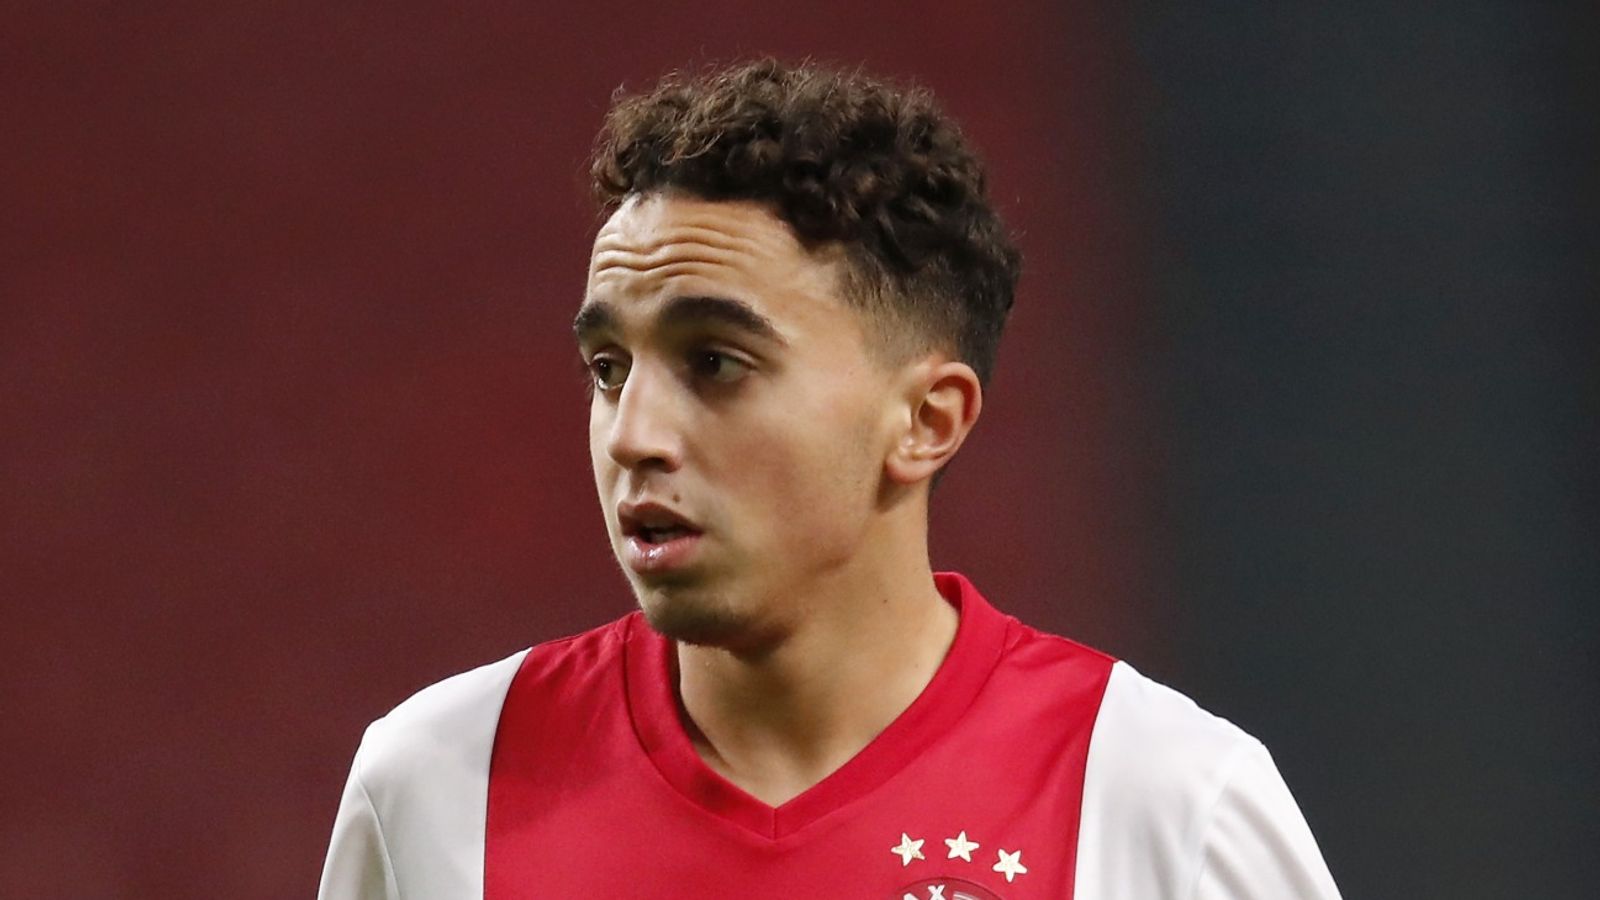 Abdelhak Nouri: Ajax to pay family £6.5m for inadequate medical care